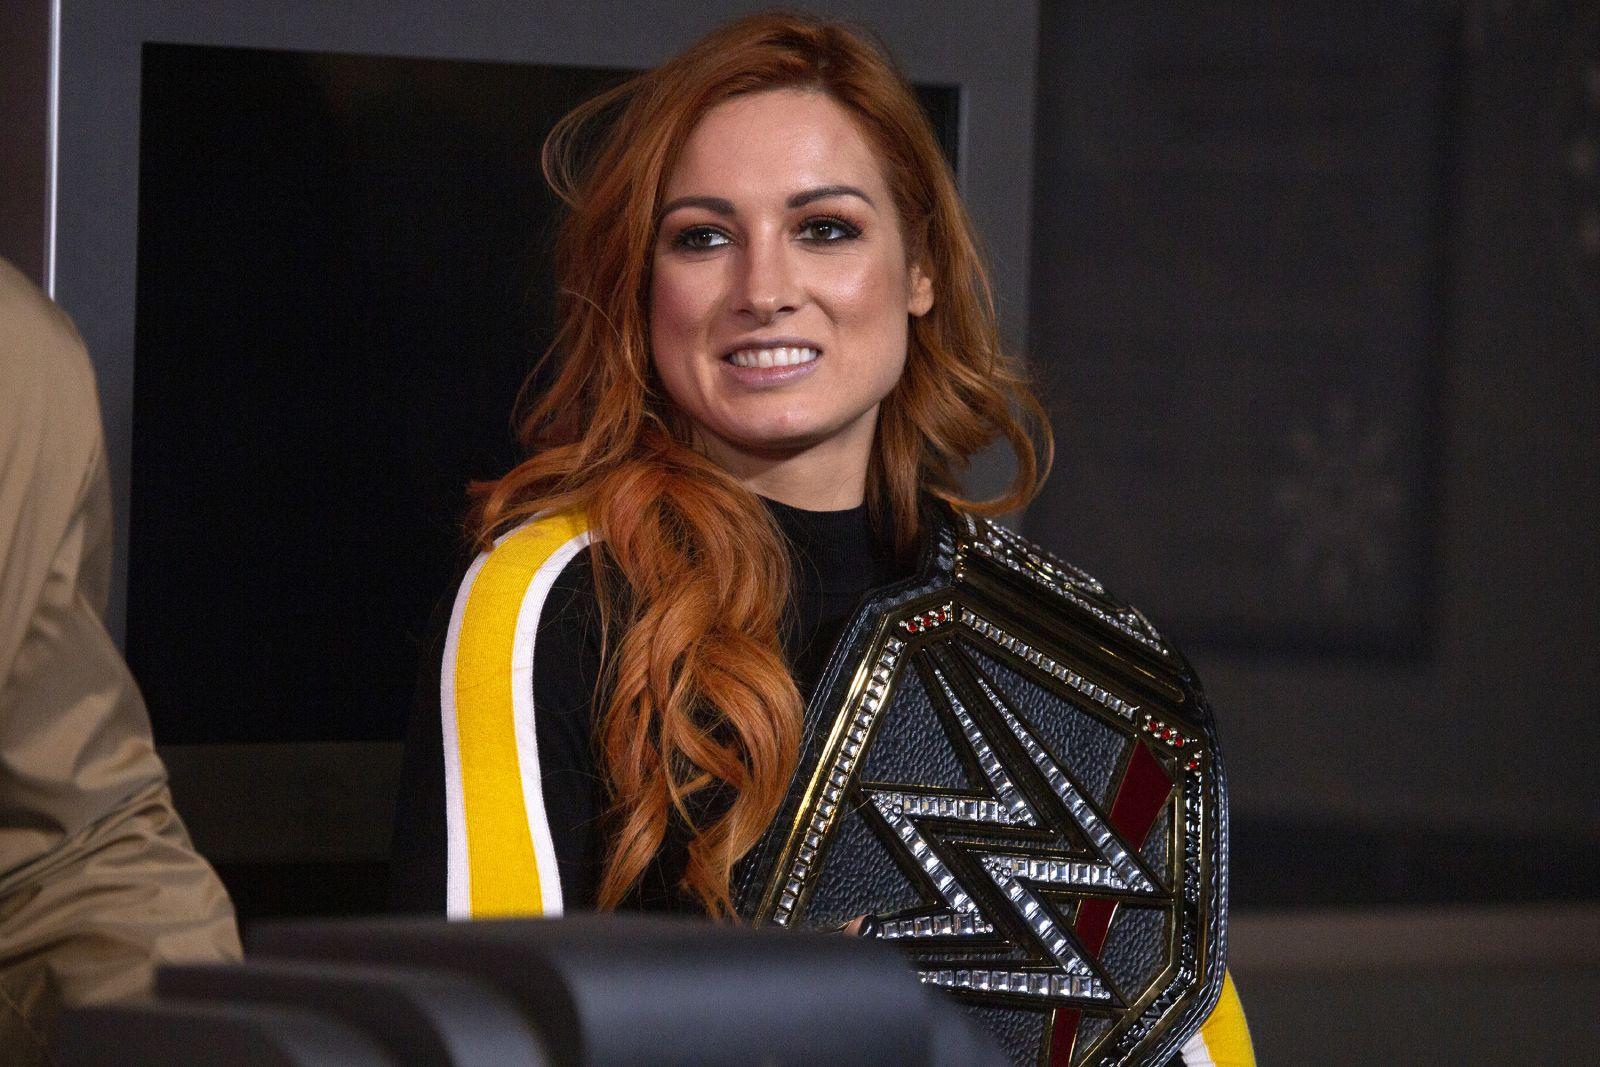 WWE WrestleMania 35 Results: Becky Lynch gets the happy ending